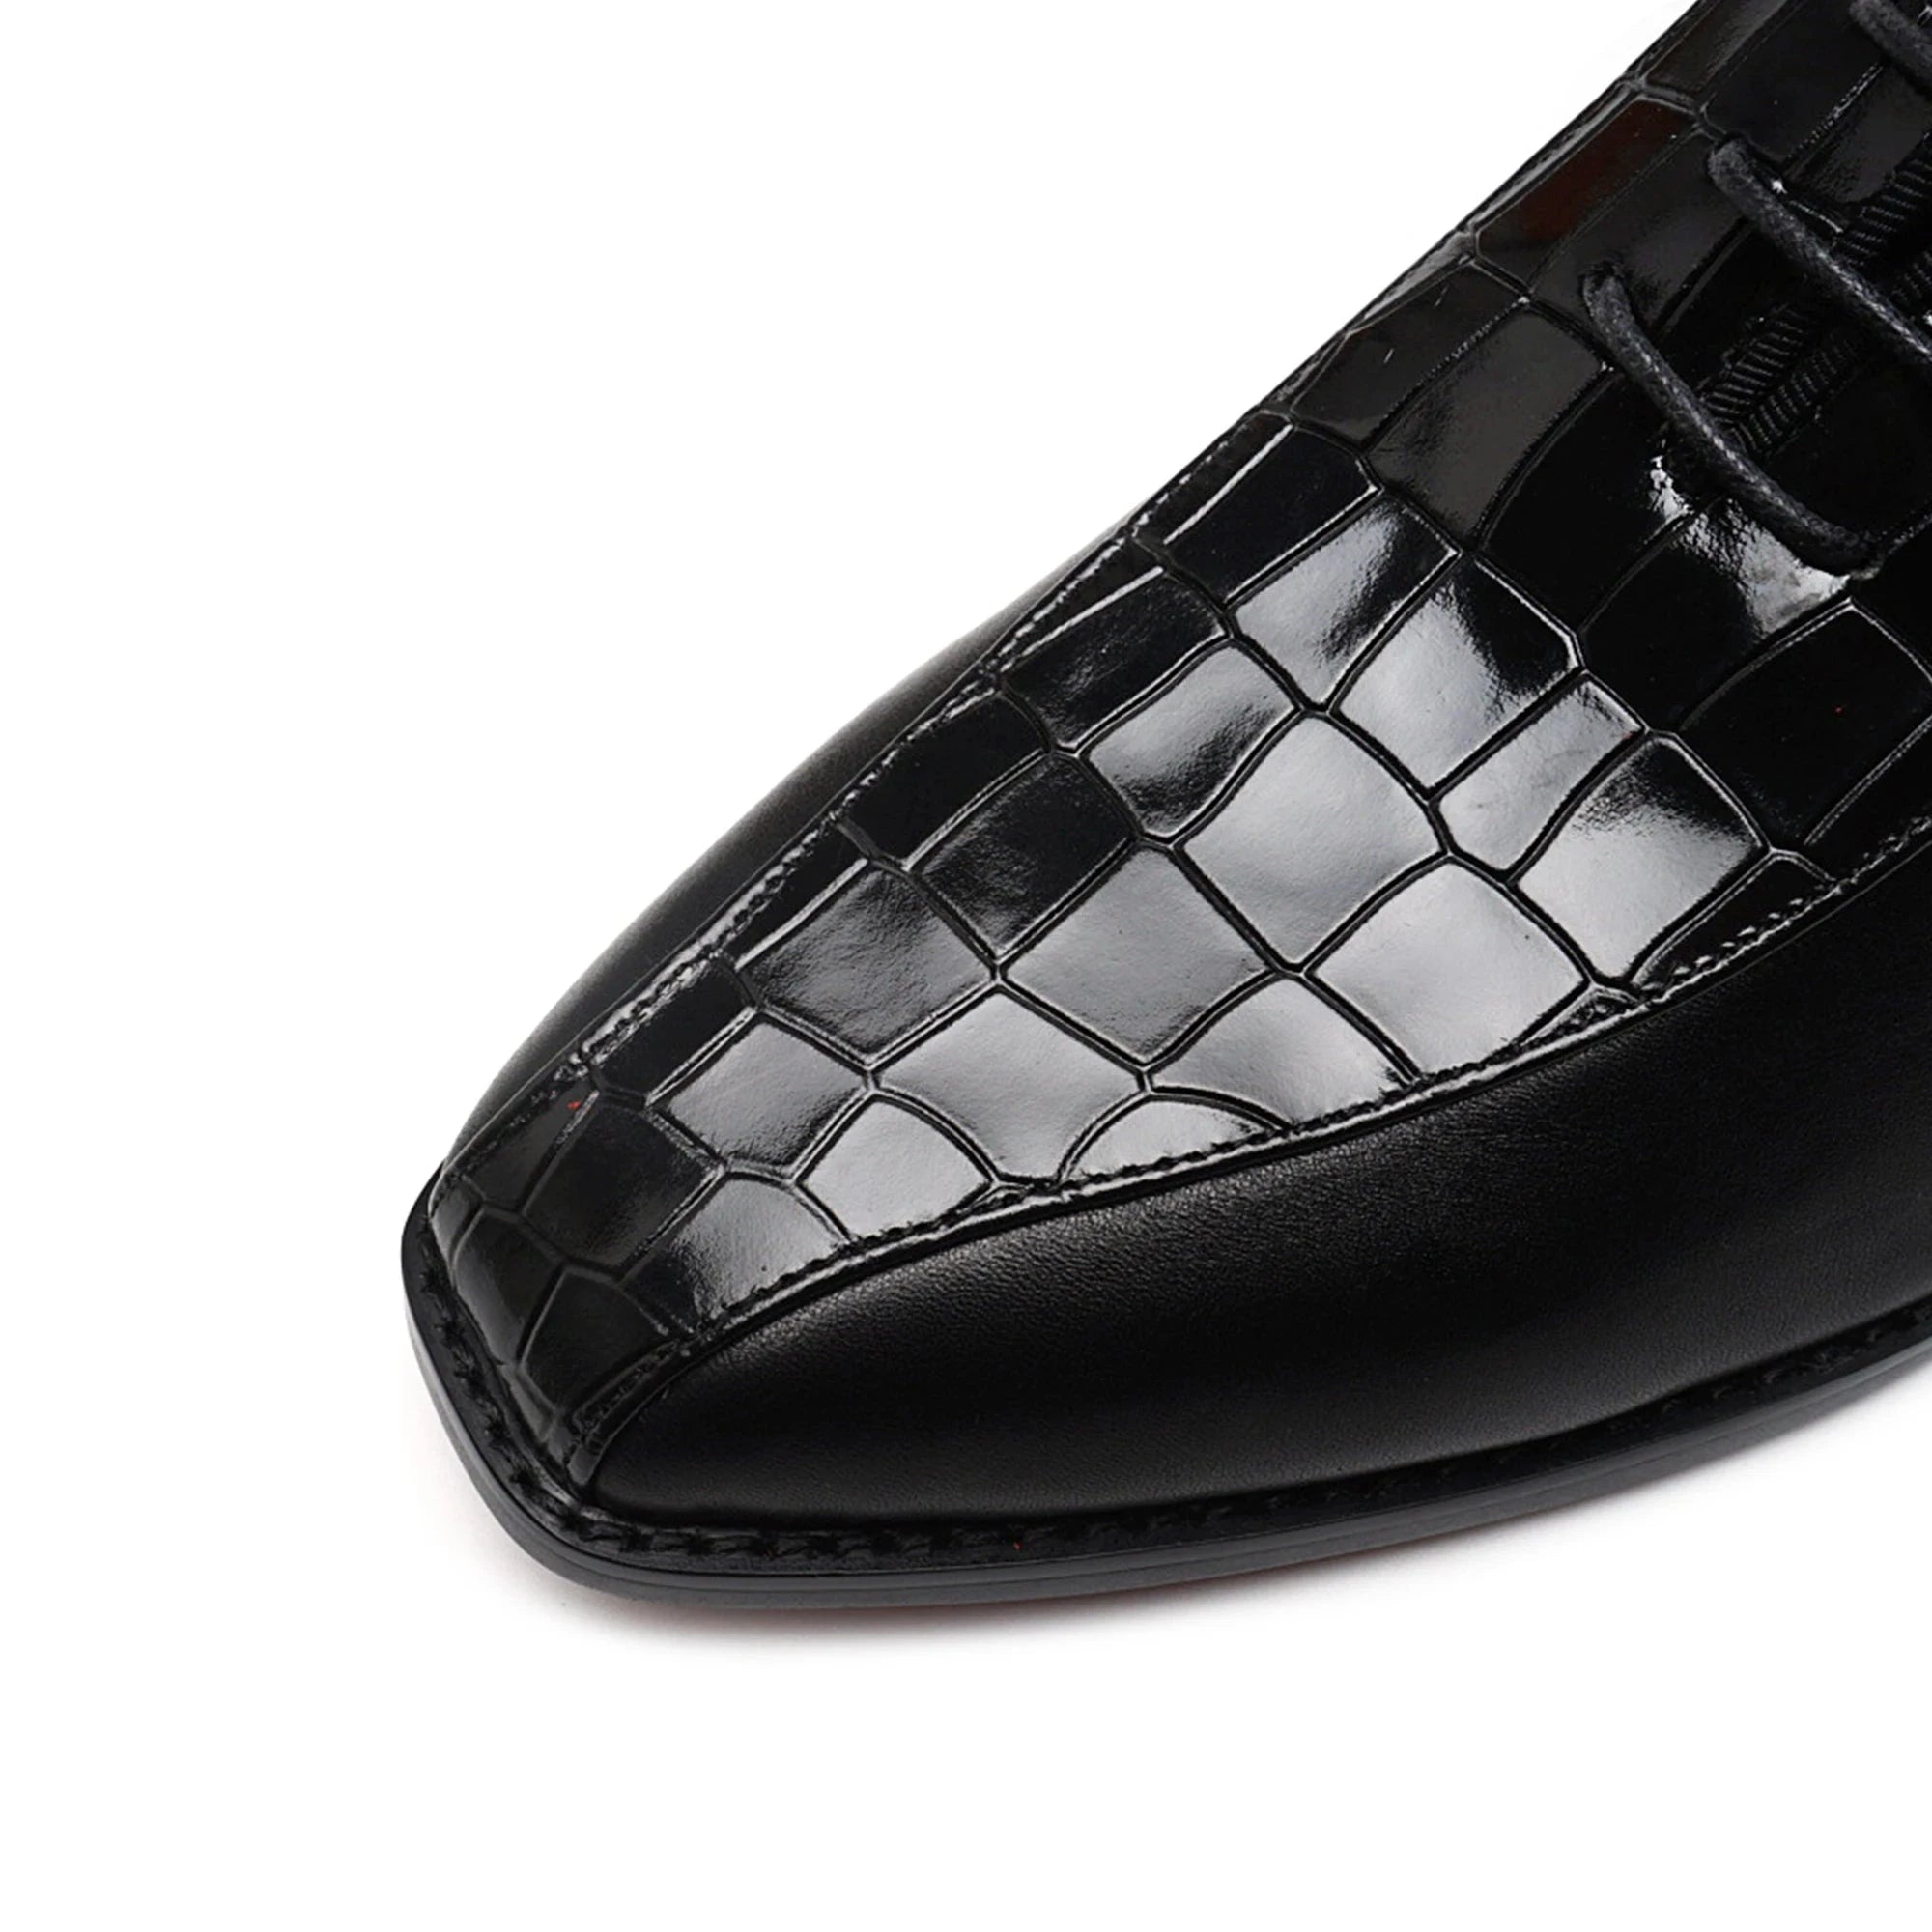 The Luxxor - Red bottom sole leather oxford dress shoes with half alligator print